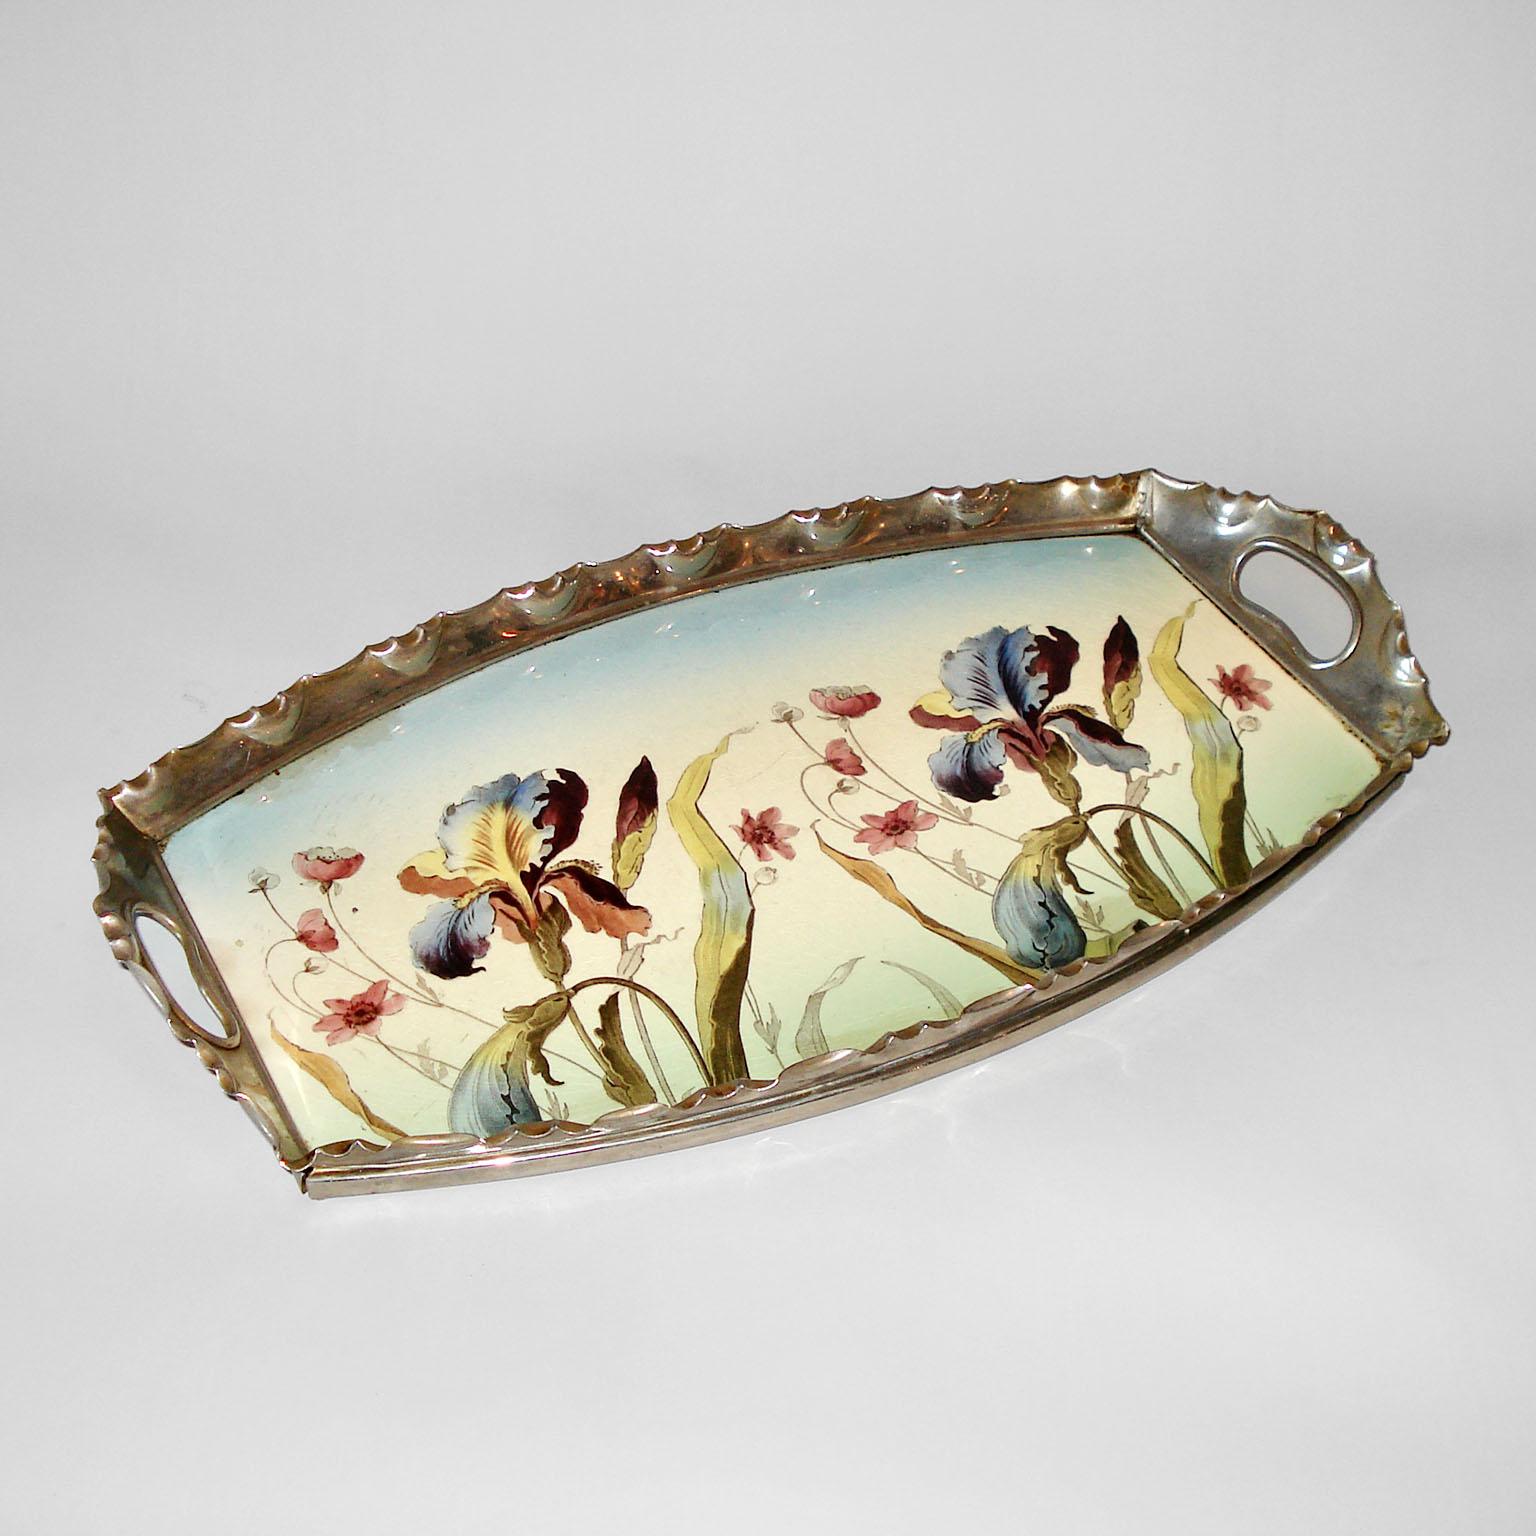 Early 20th Century Art Nouveau Porcelain and Pewter Tray by Max Dannhorn, Villeroy & Boch